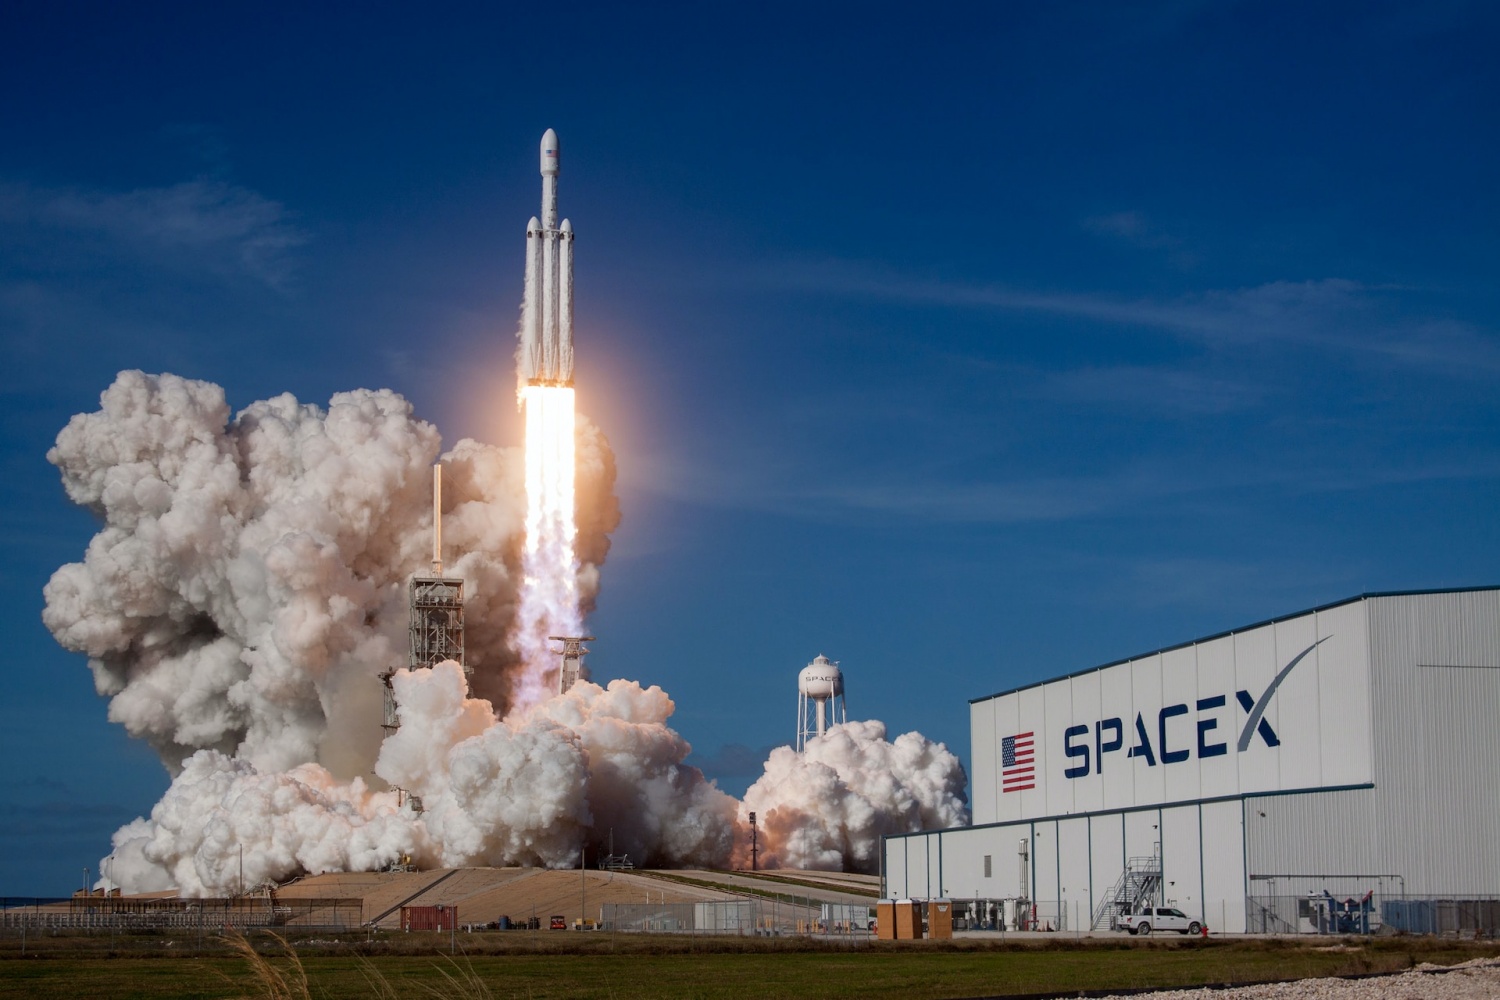 SpaceX to Almost Monopolize Space Payload as the Company is On Track to Deliver 80% of Total Shipments